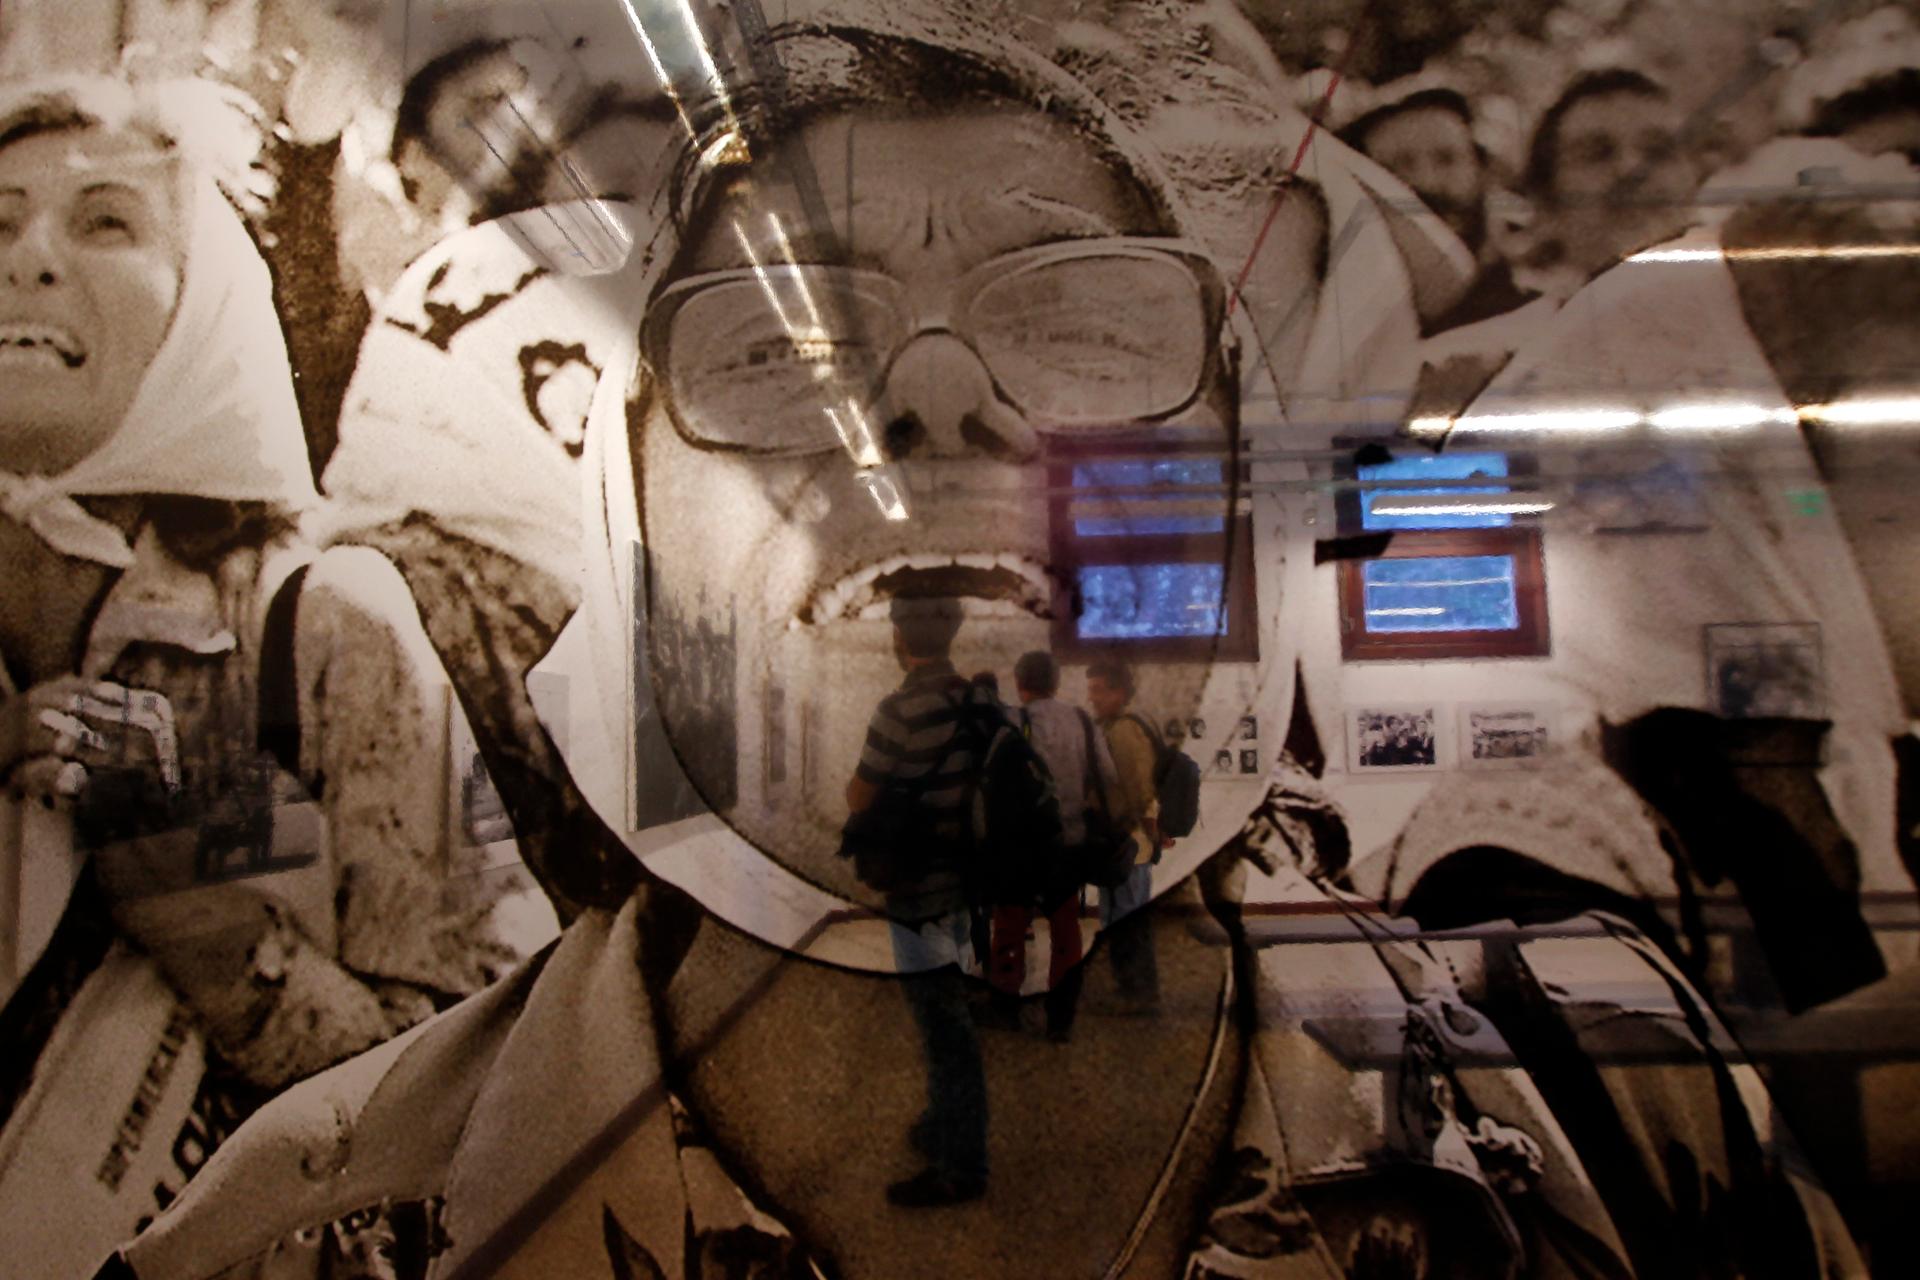 People are seen through a photograph by Argentine photographer Daniel Garcia at a photo exhibition about human rights organization Abuelas de Plaza de Mayo (Grandmothers of Plaza de Mayo), March 24, 2014.